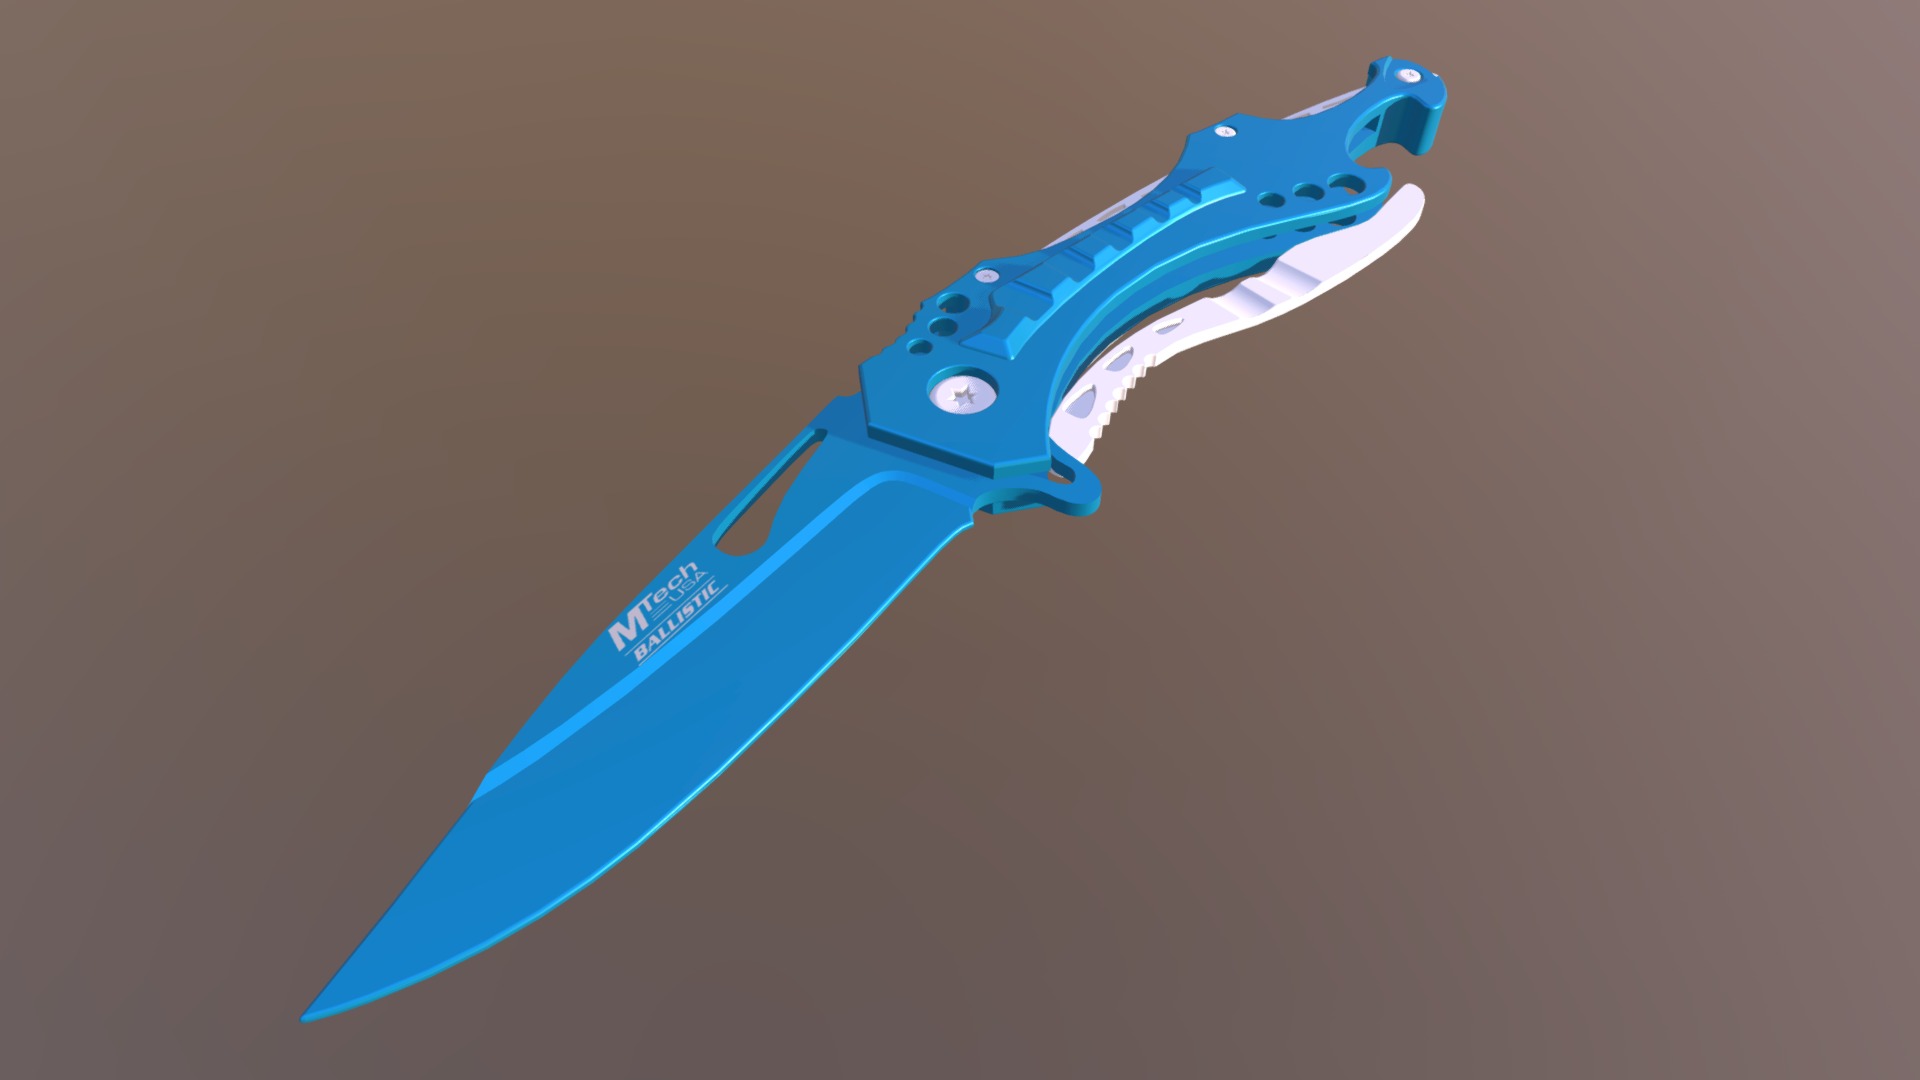 A 3d model of a blue MTech USA switch blade made in fusion 360 - MTech USA Ballistic Knife - 3D model by Mary Williams (@MaryWilliams) 3d model